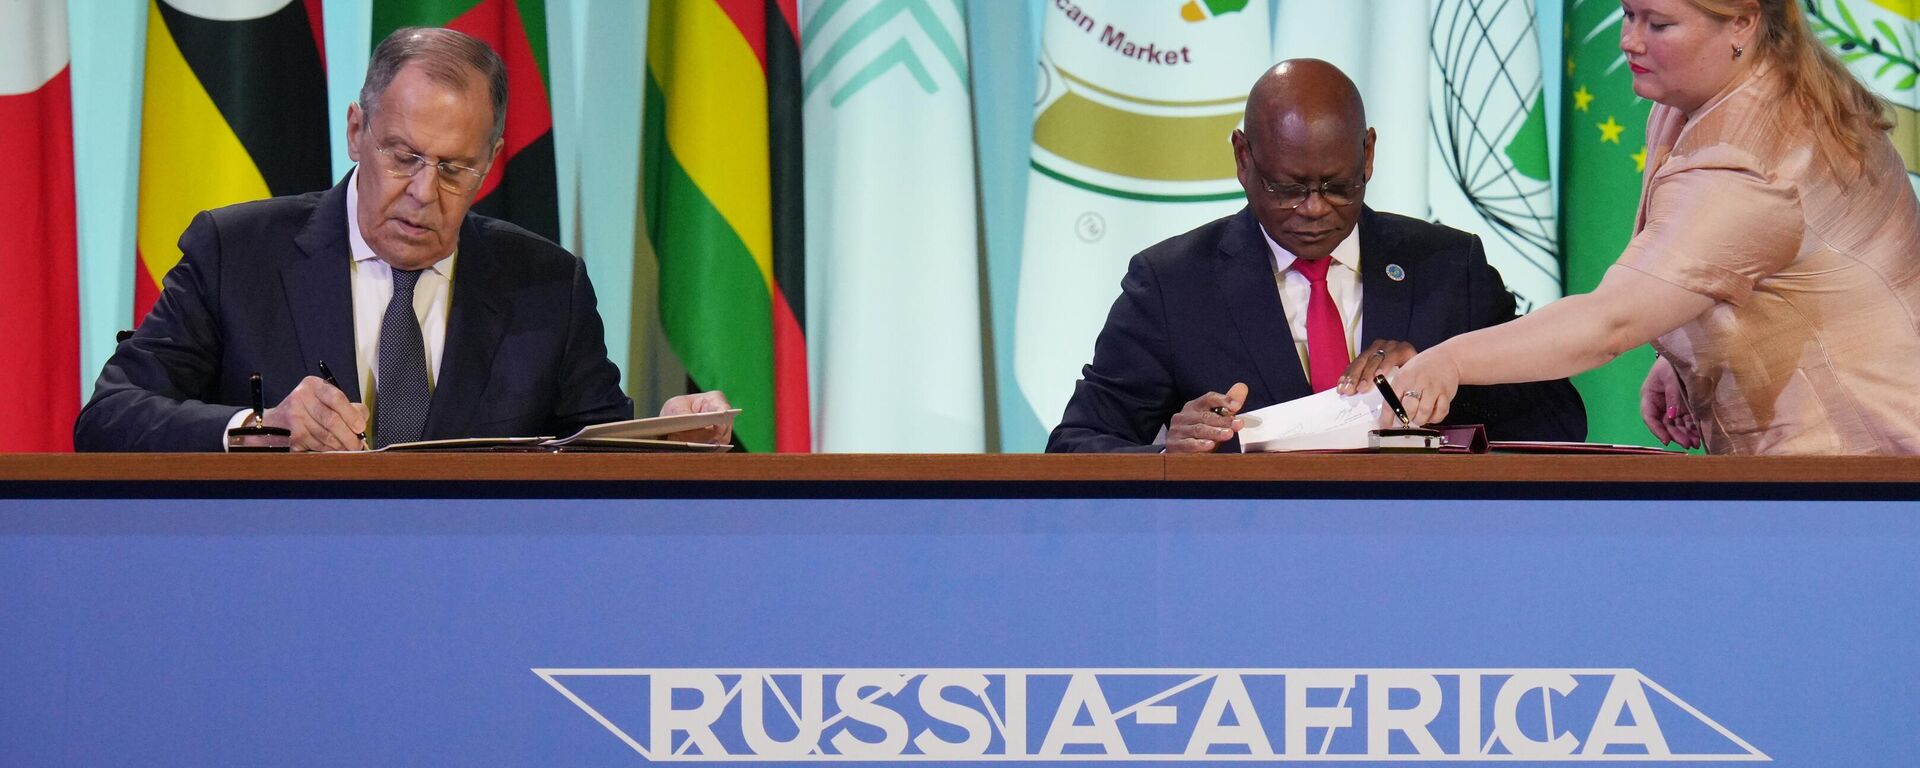 Russian Foreign Minister Sergey Lavrov and President of the Commission of the Economic Community of Central African States Gilberto da Piedade Verissimo sign a memorandum on the results of the Second Russia-Africa Summit. July 28, 2023. - Sputnik International, 1920, 28.07.2023